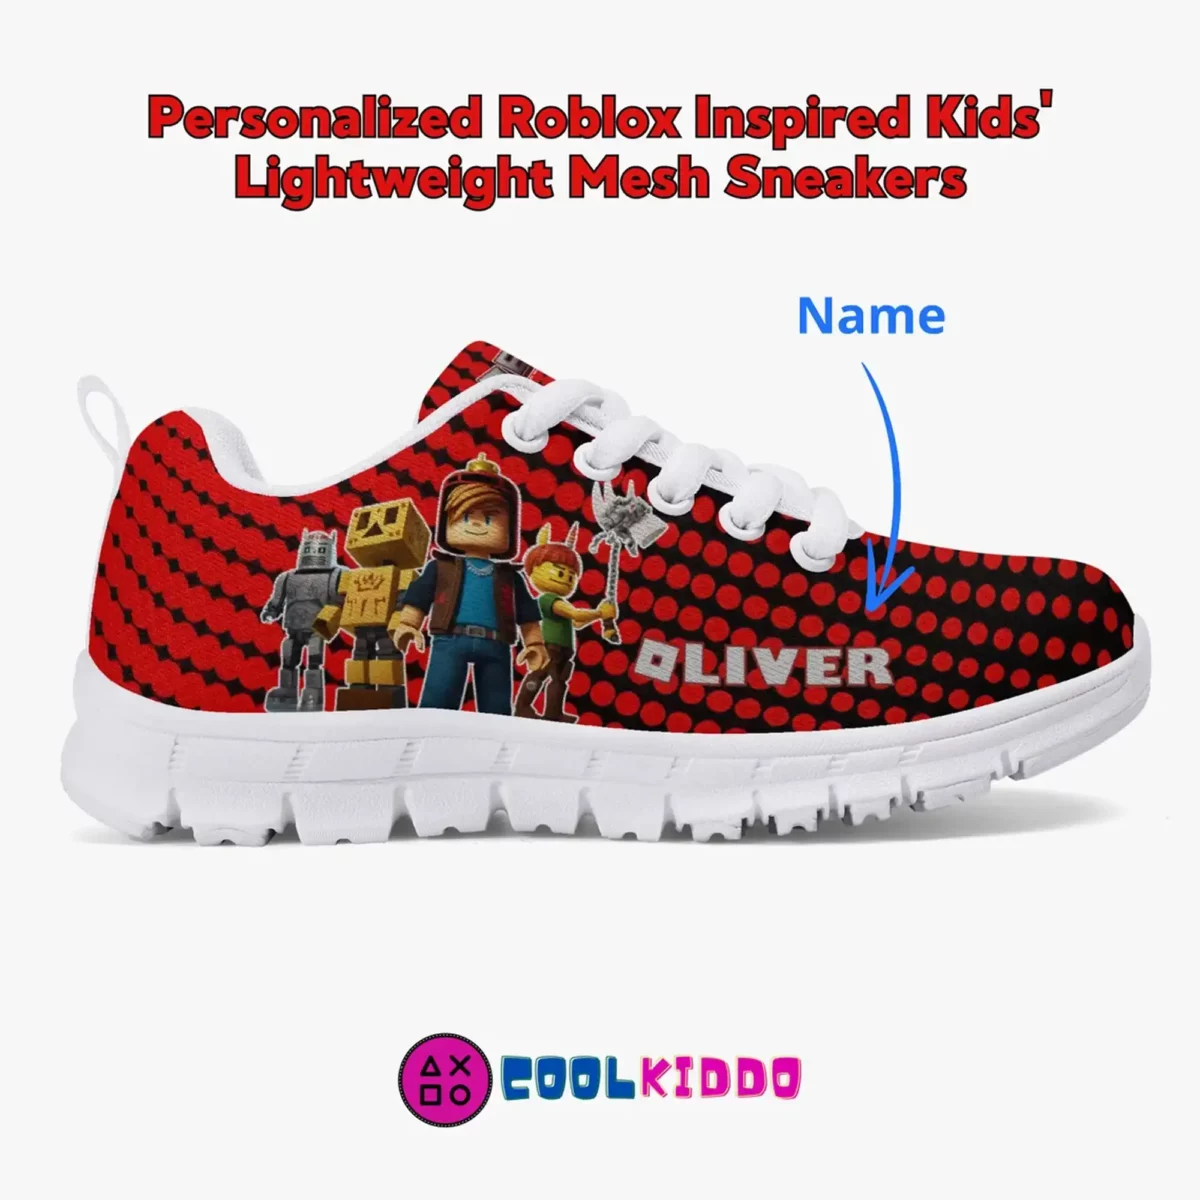 Personalized Roblox Video Game Red Shoes for Boys Lightweight Mesh Blue Sneakers Cool Kiddo 12